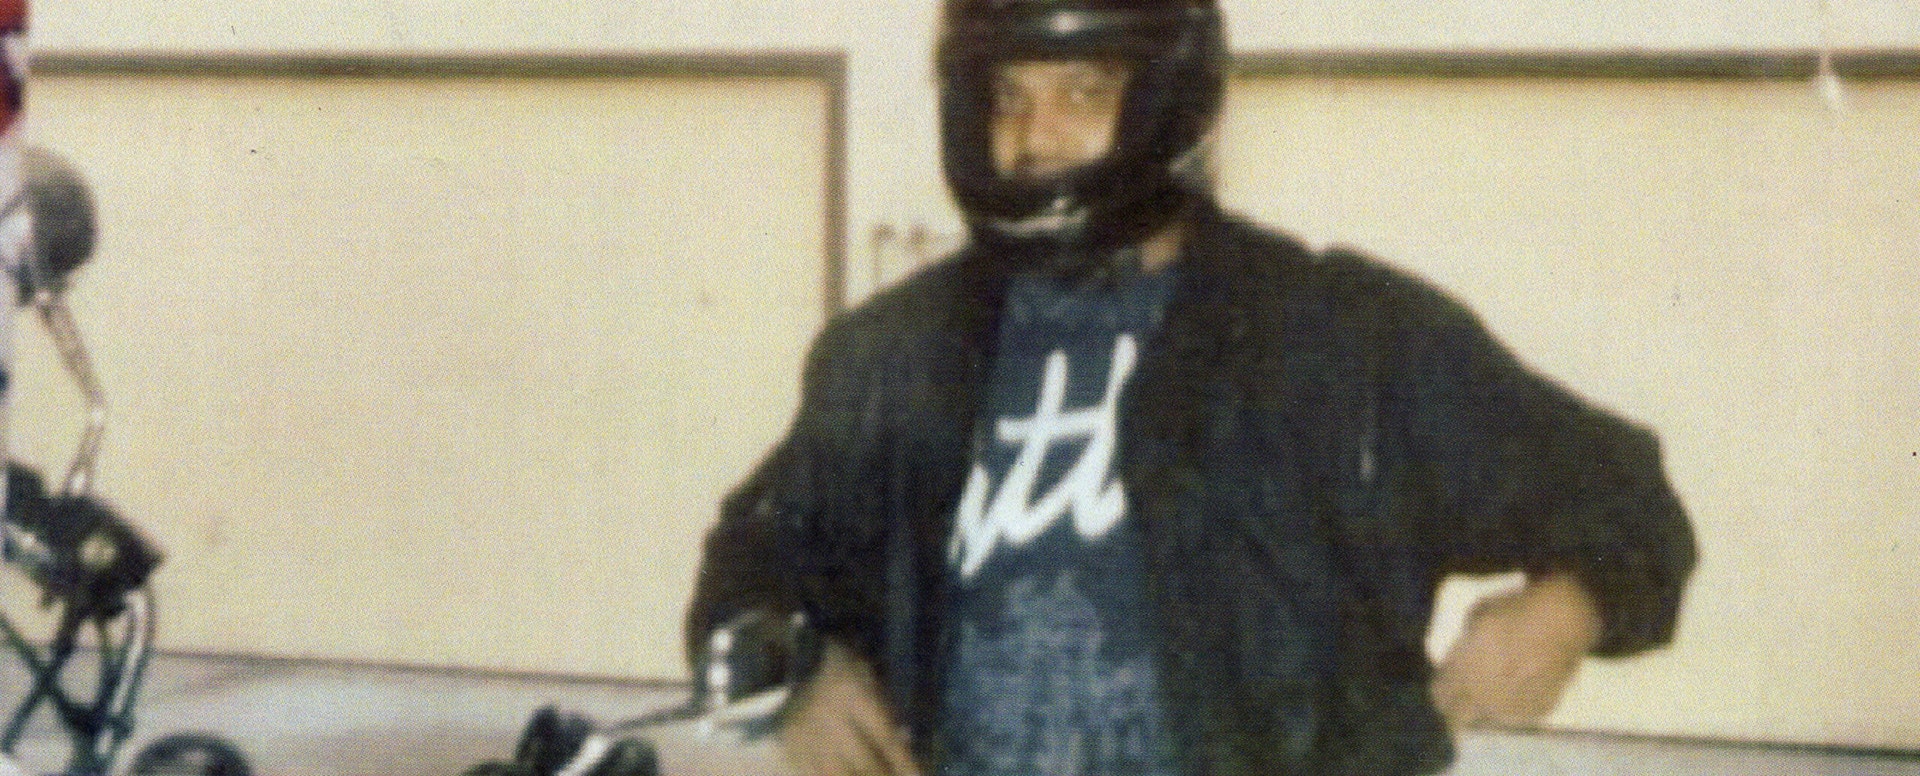 Andre Butler poses next to a motorcycle, wearing a helmet.